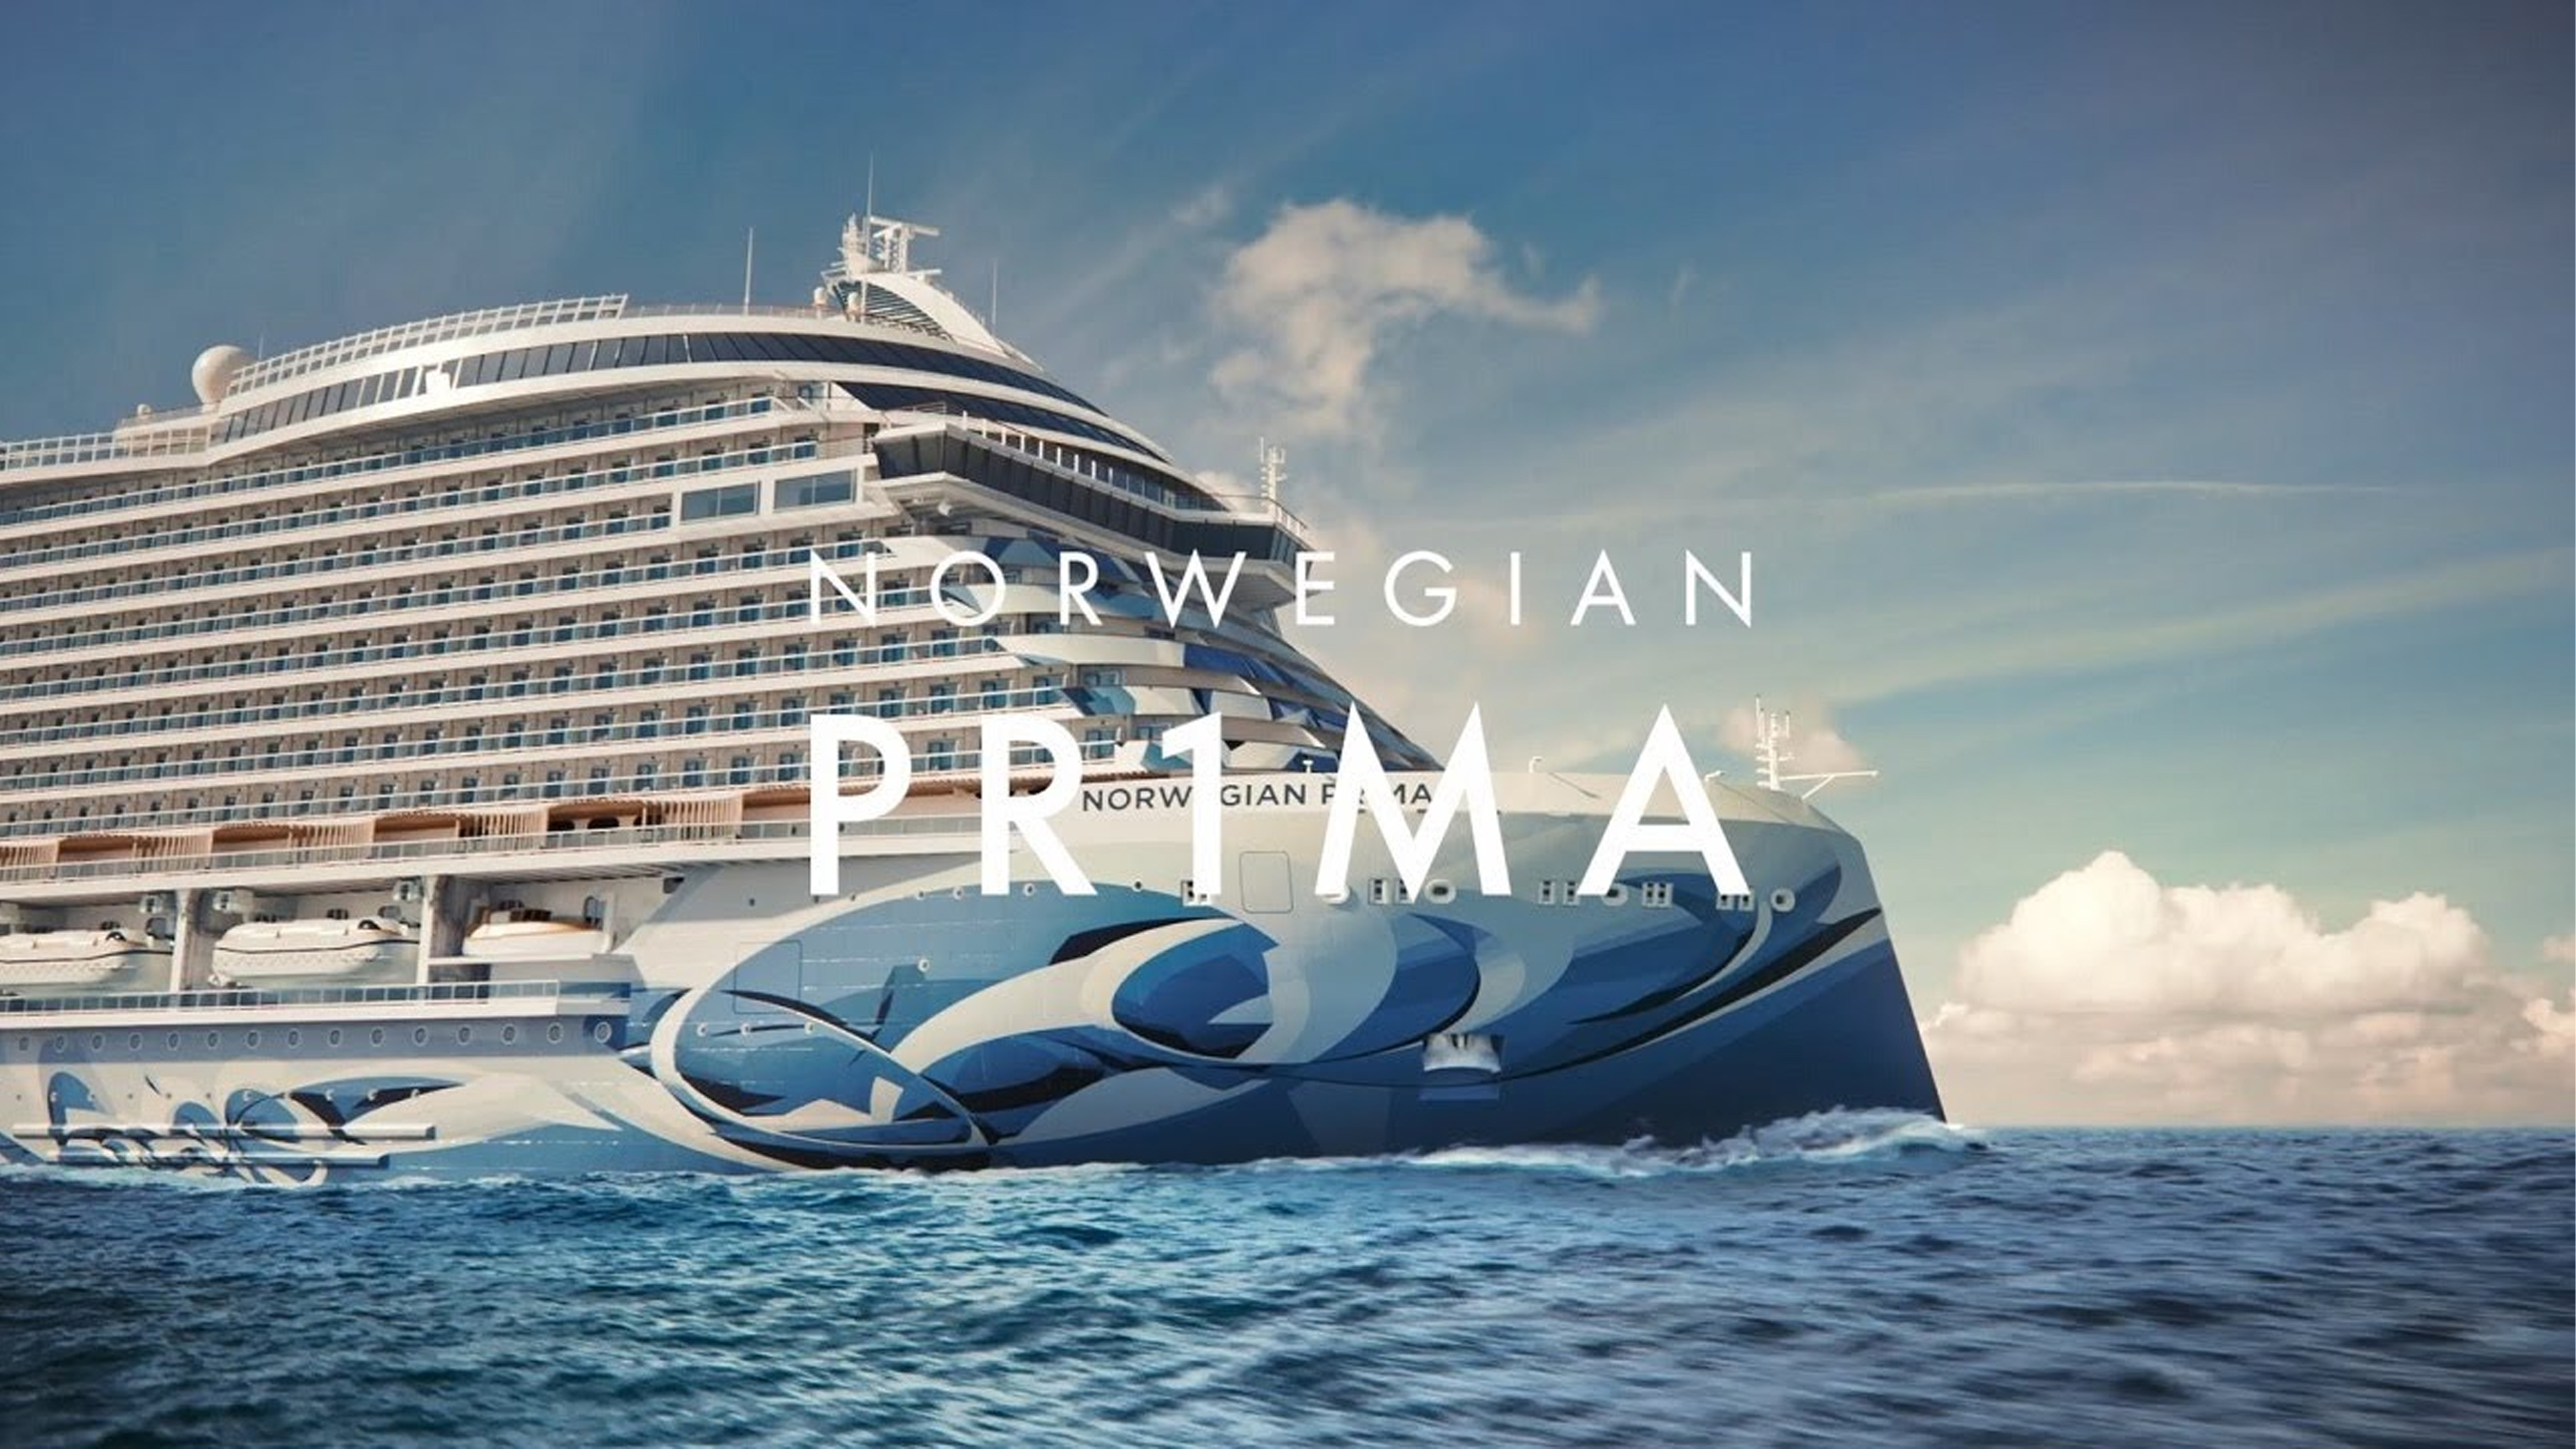 Norwegian Prima will be the first of six vessels of Norwegian Cruise Line’s new Prima Class. With voyages beginning in summer 2022, Norwegian Prima will feature show-stopping entertainment and recreational activities including the largest racetrack at sea, the world’s first transformational theater and night club and freefall drop dry slides.  Headlining the entertainment on board will be the Tony Award®-nominated “Summer: The Donna Summer Musical,” and “Light Balance” as seen on “America’s Got Talent.”  Guests will also have the opportunity to take part in some of the world’s most legendary game shows including, “The Price is Right LIVE on NCL,” “Supermarket Sweep LIVE on NCL,” “Press Your Luck LIVE on NCL,” and “Beat the Clock LIVE on NCL.”